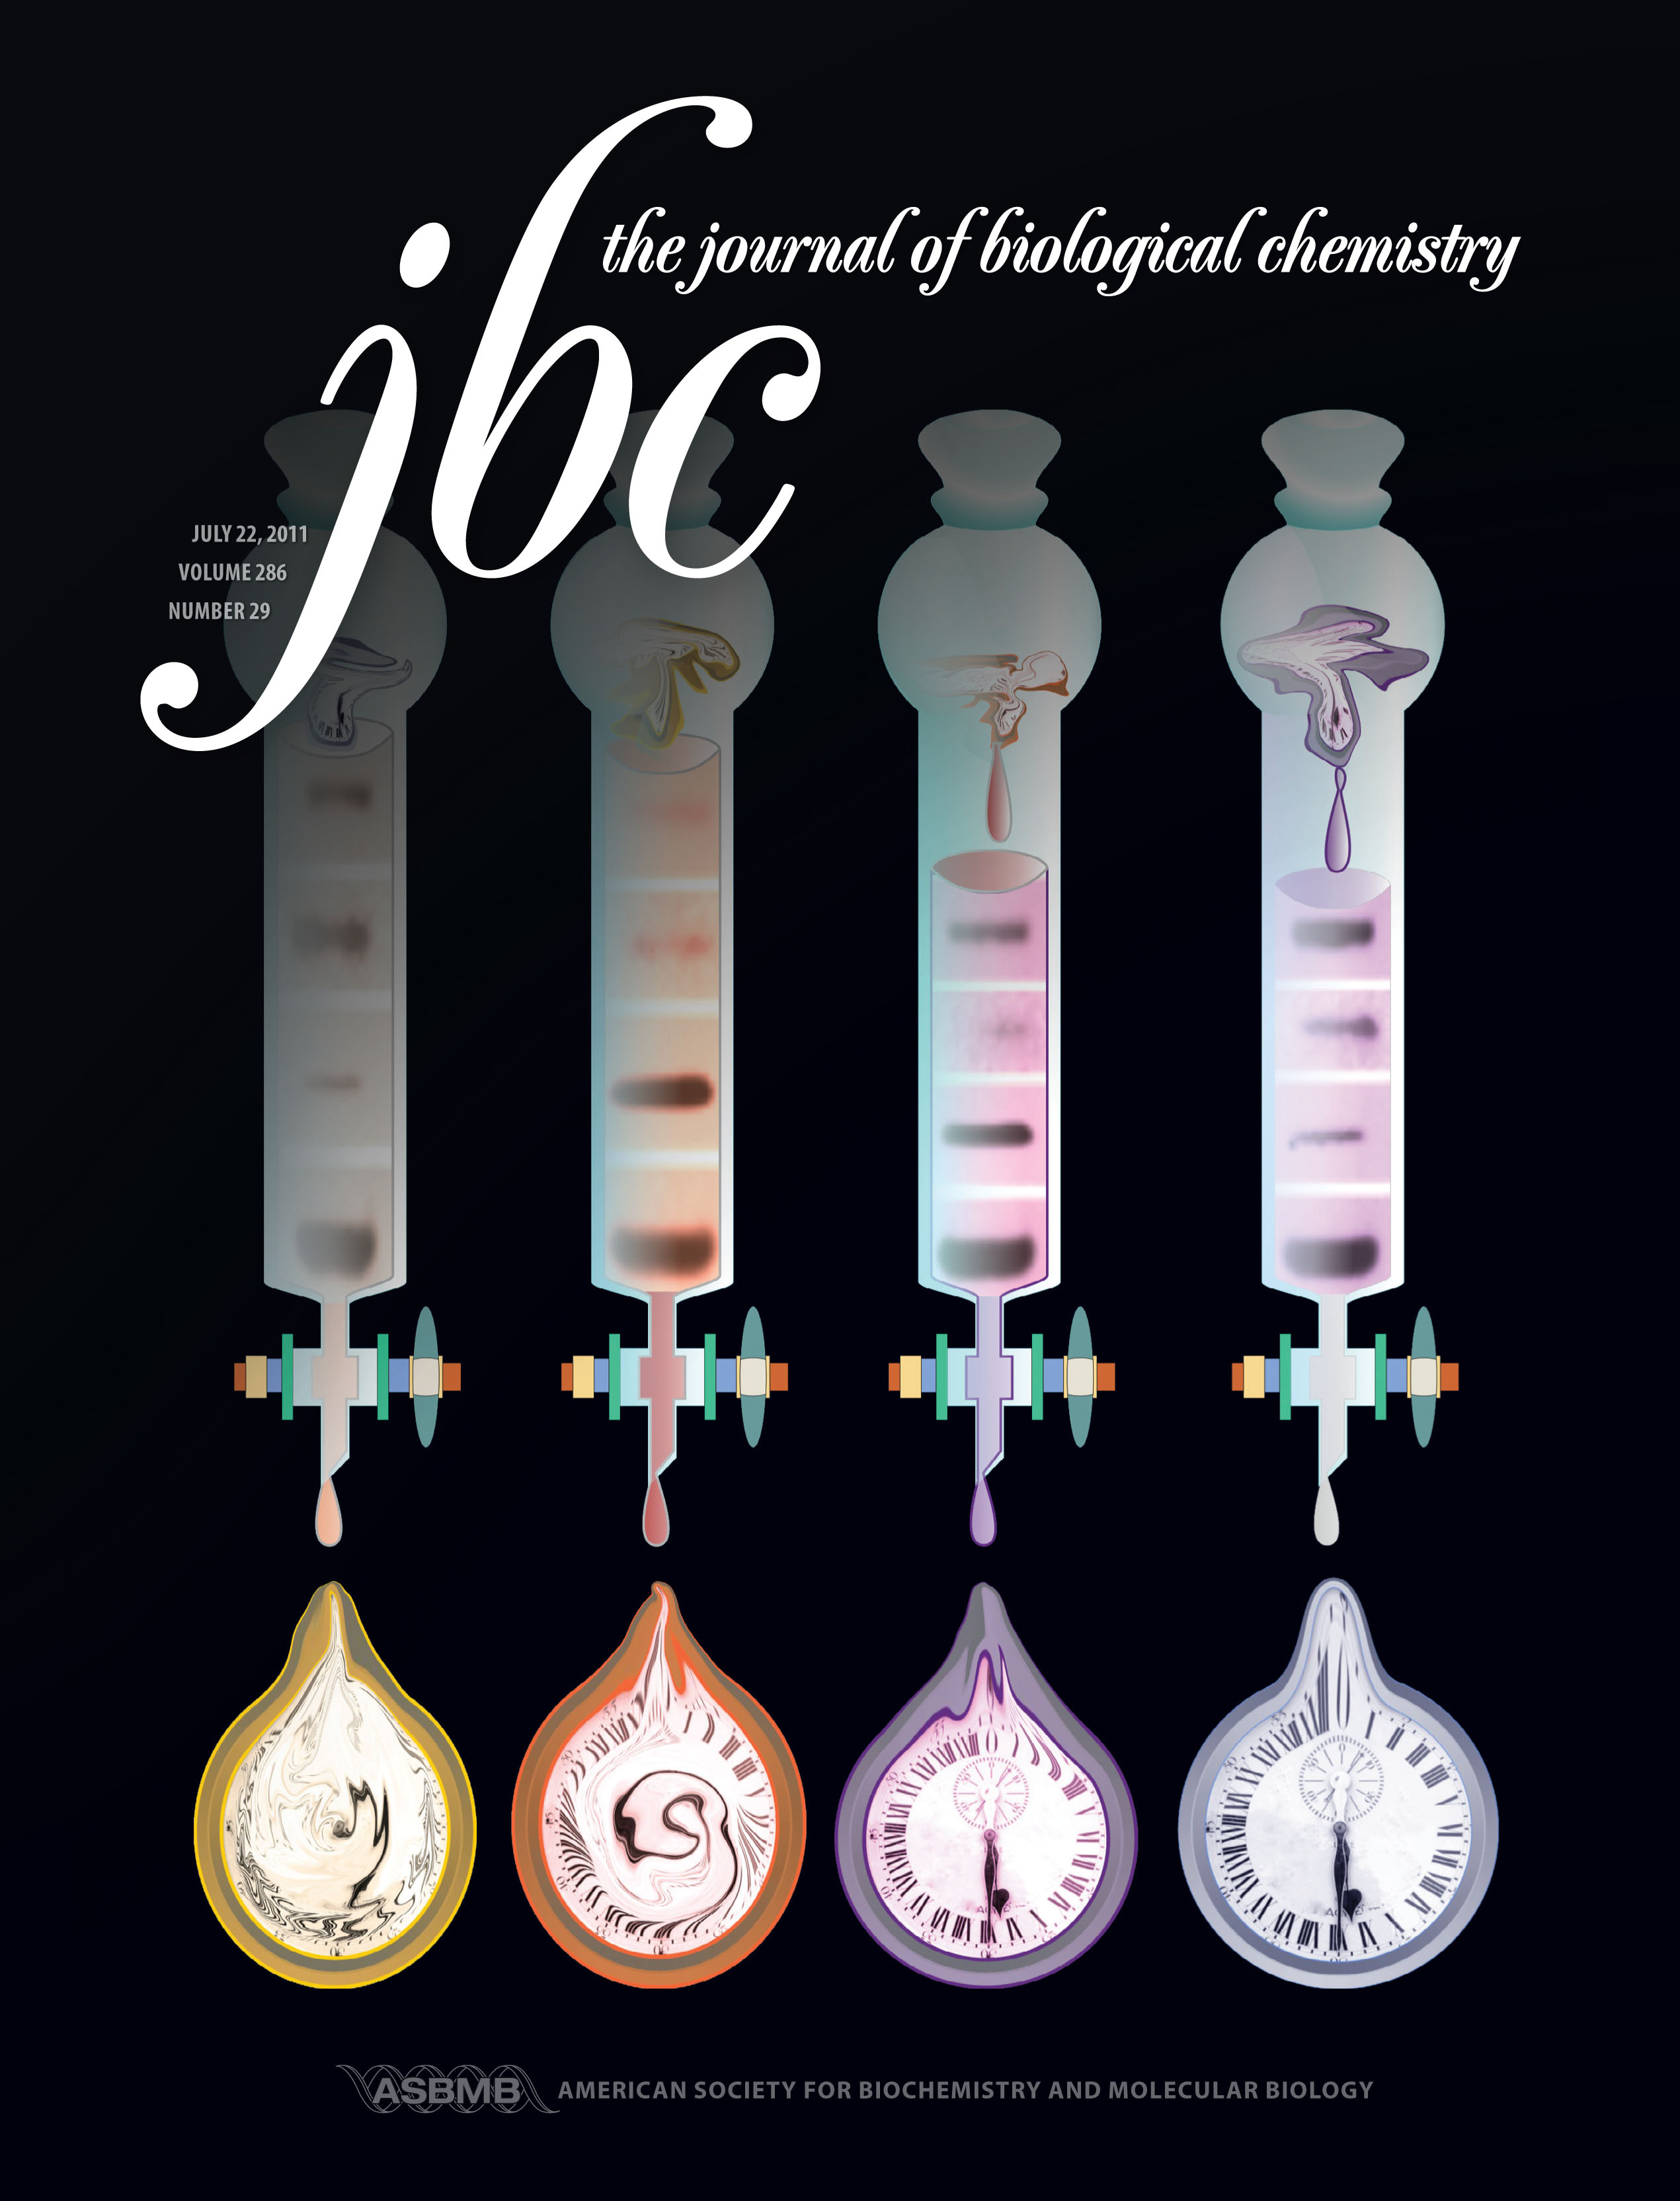 From the cover of JBC issue July 22, 2011